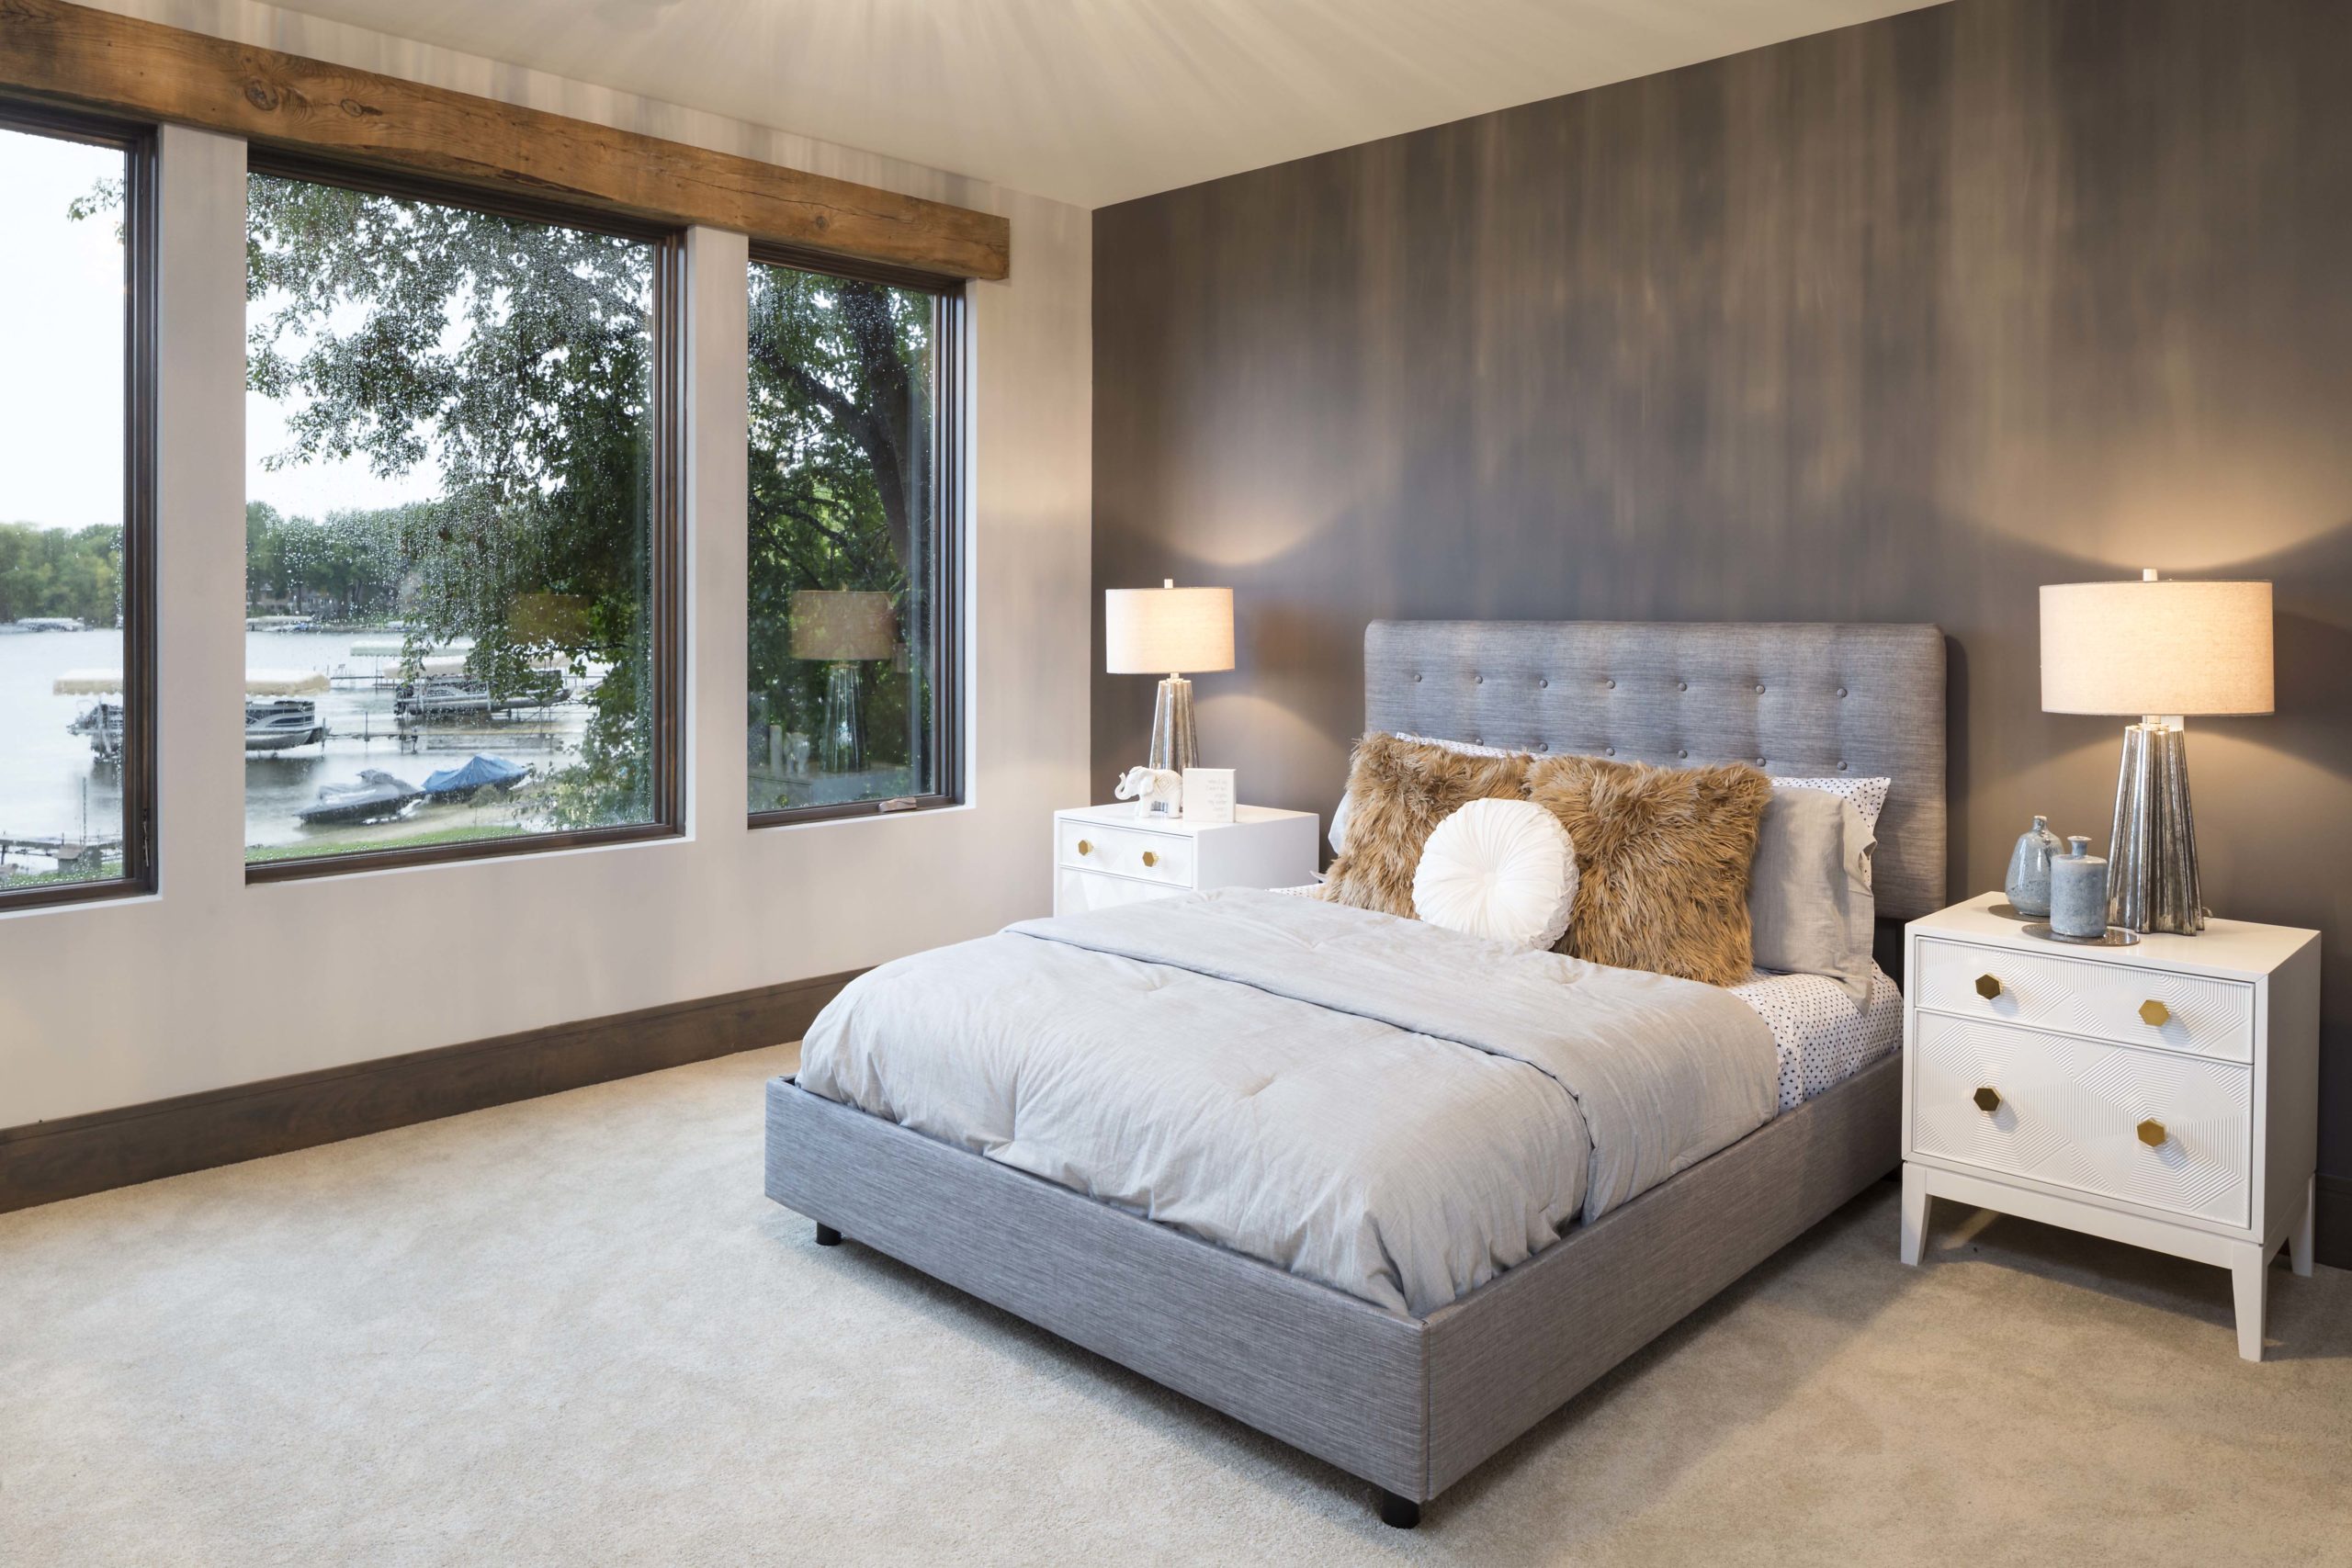 master bedroom with a view of the lake